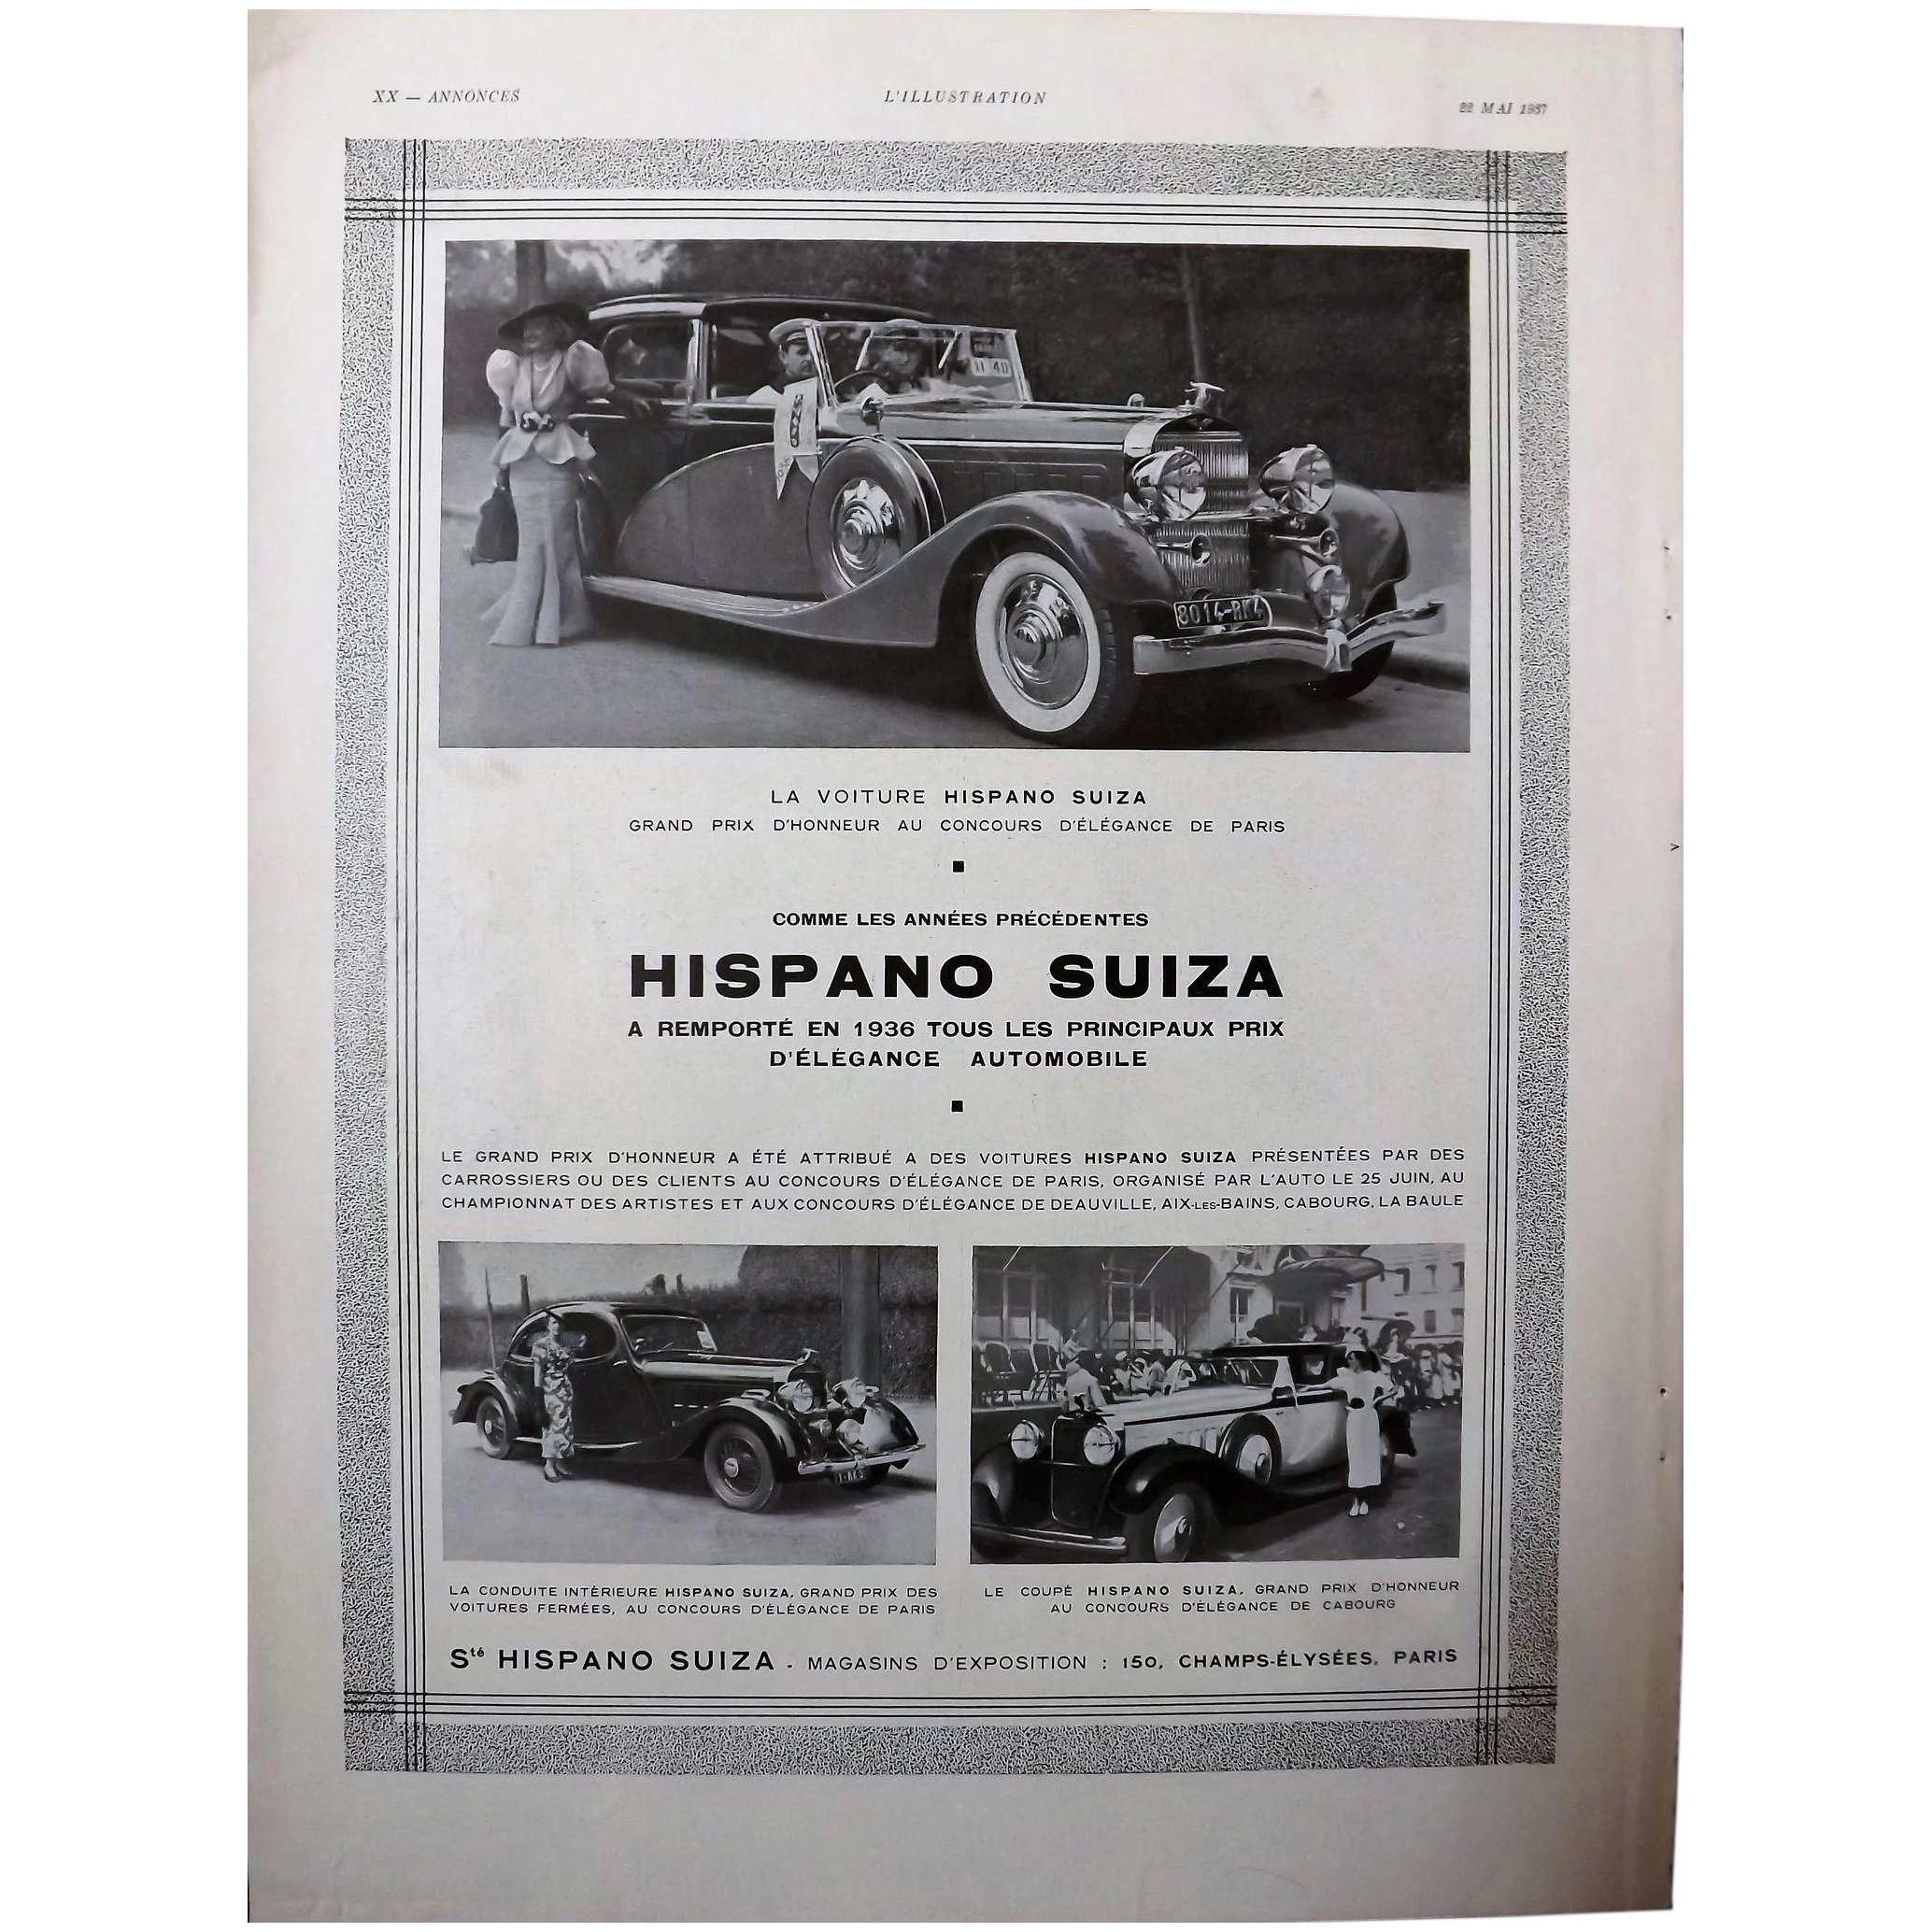 HISPANO SUIZA Art Deco Advertisement from the French Magazine L' Illustration 1937